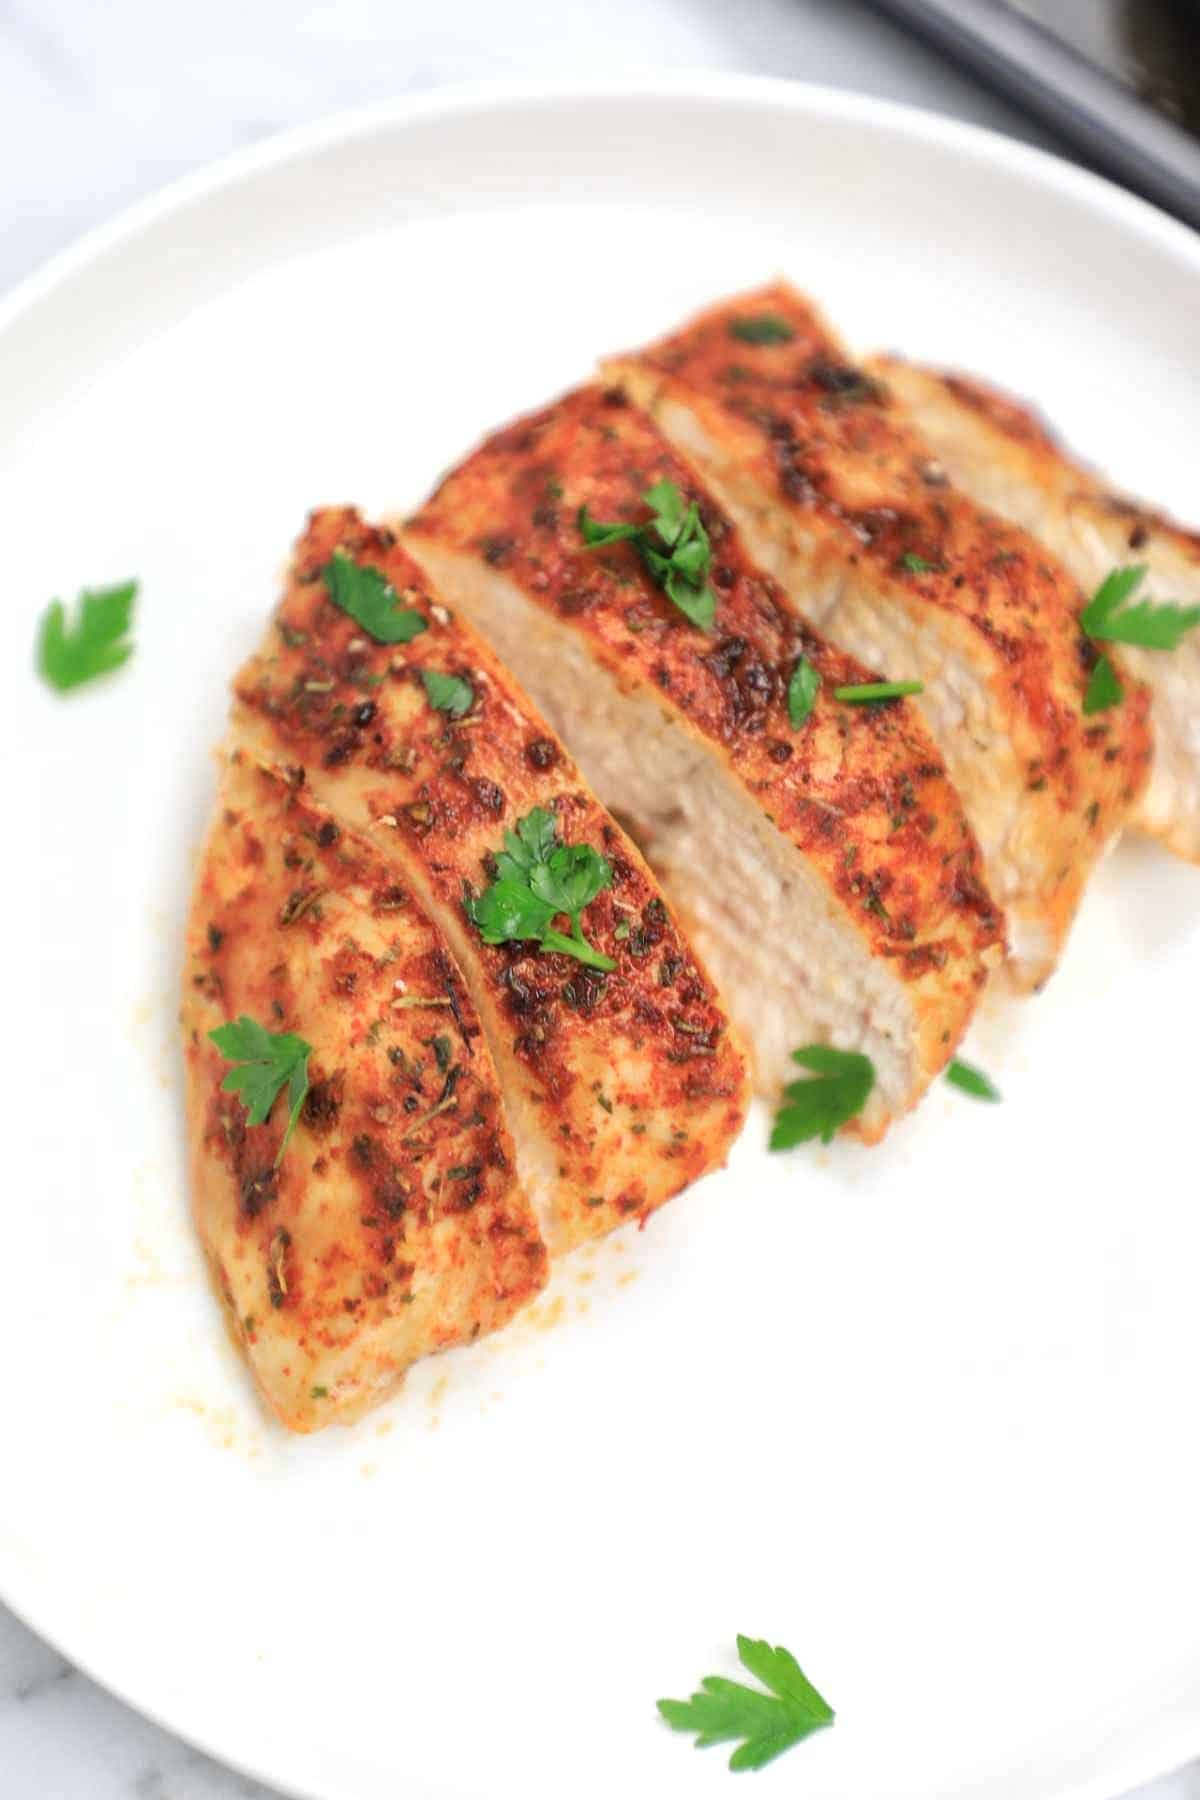 cooked chicken breast sliced and served on a plate.